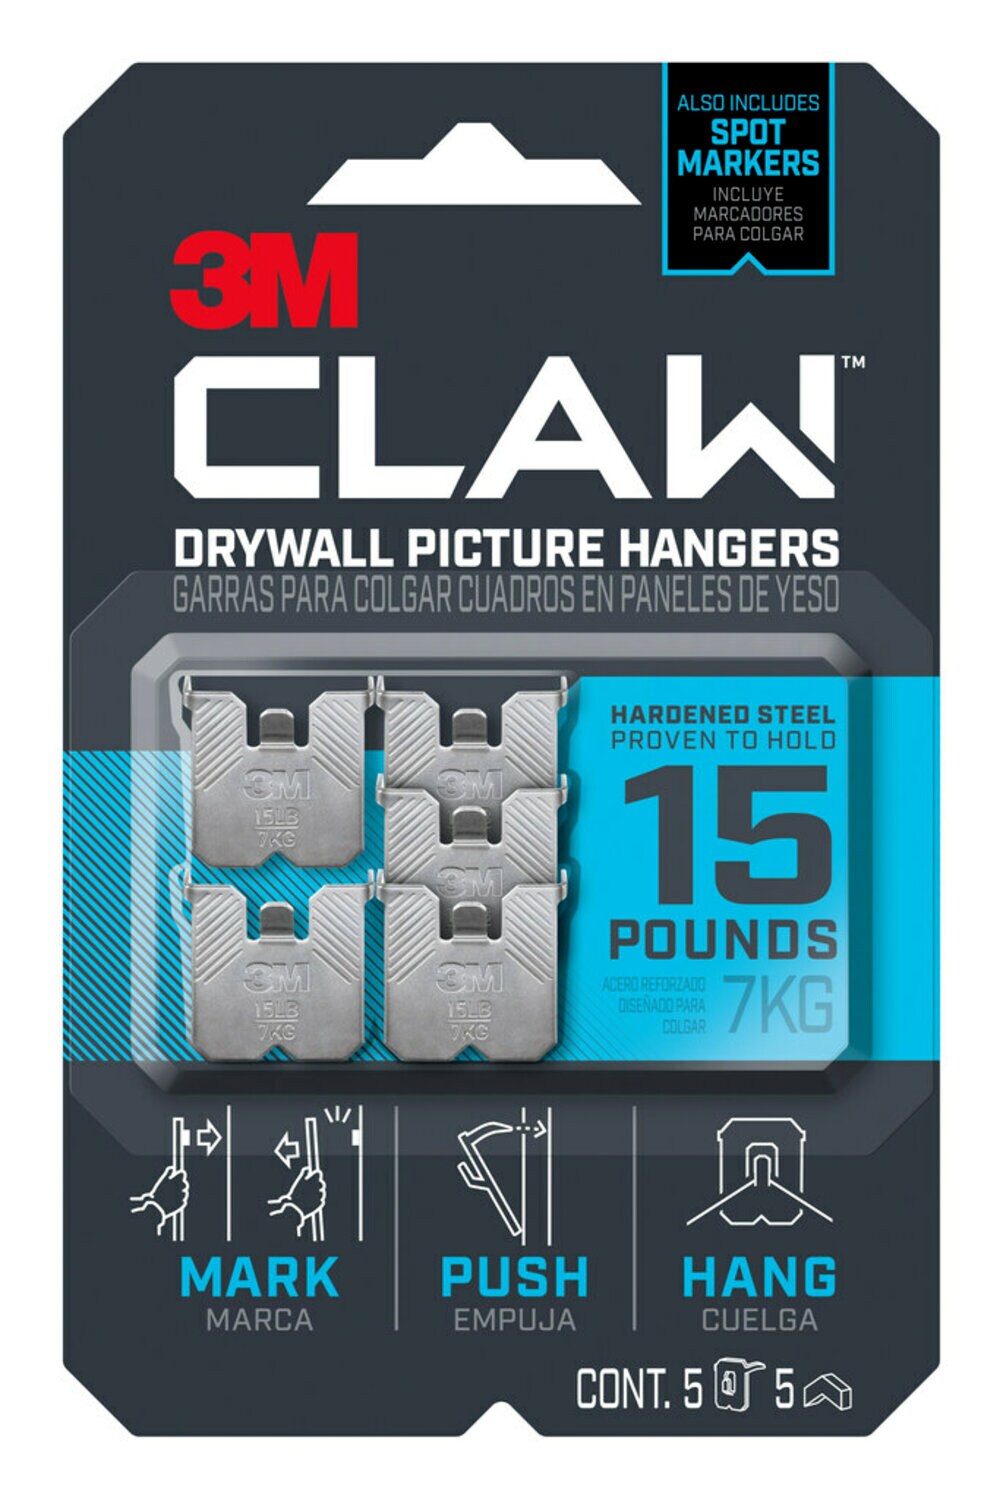 7100227268 - 3M CLAW Drywall Picture Hanger 15 lb with Temporary Spot Marker 3PH15M-5EF, 5 hangers, 5 markers